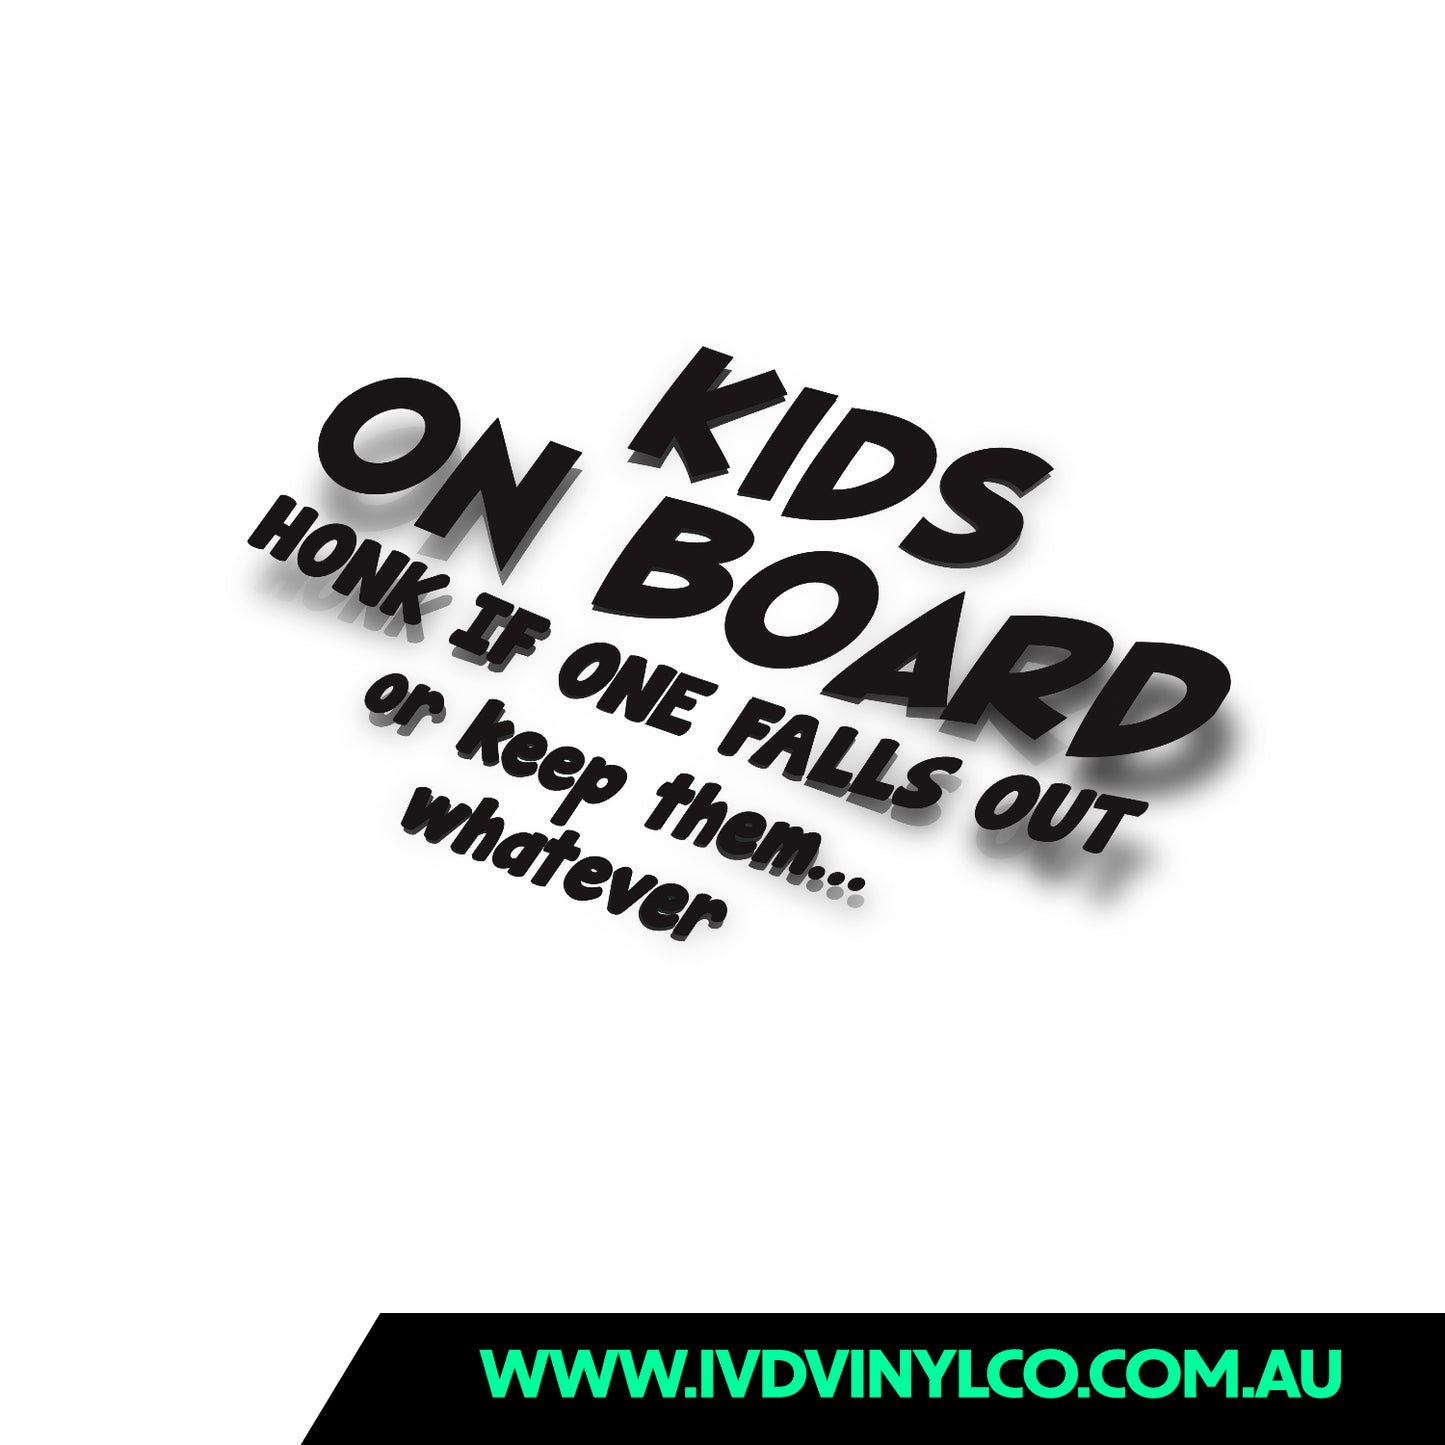 Kids On Board Honk If One Falls Out Or Keep Them … Whatever